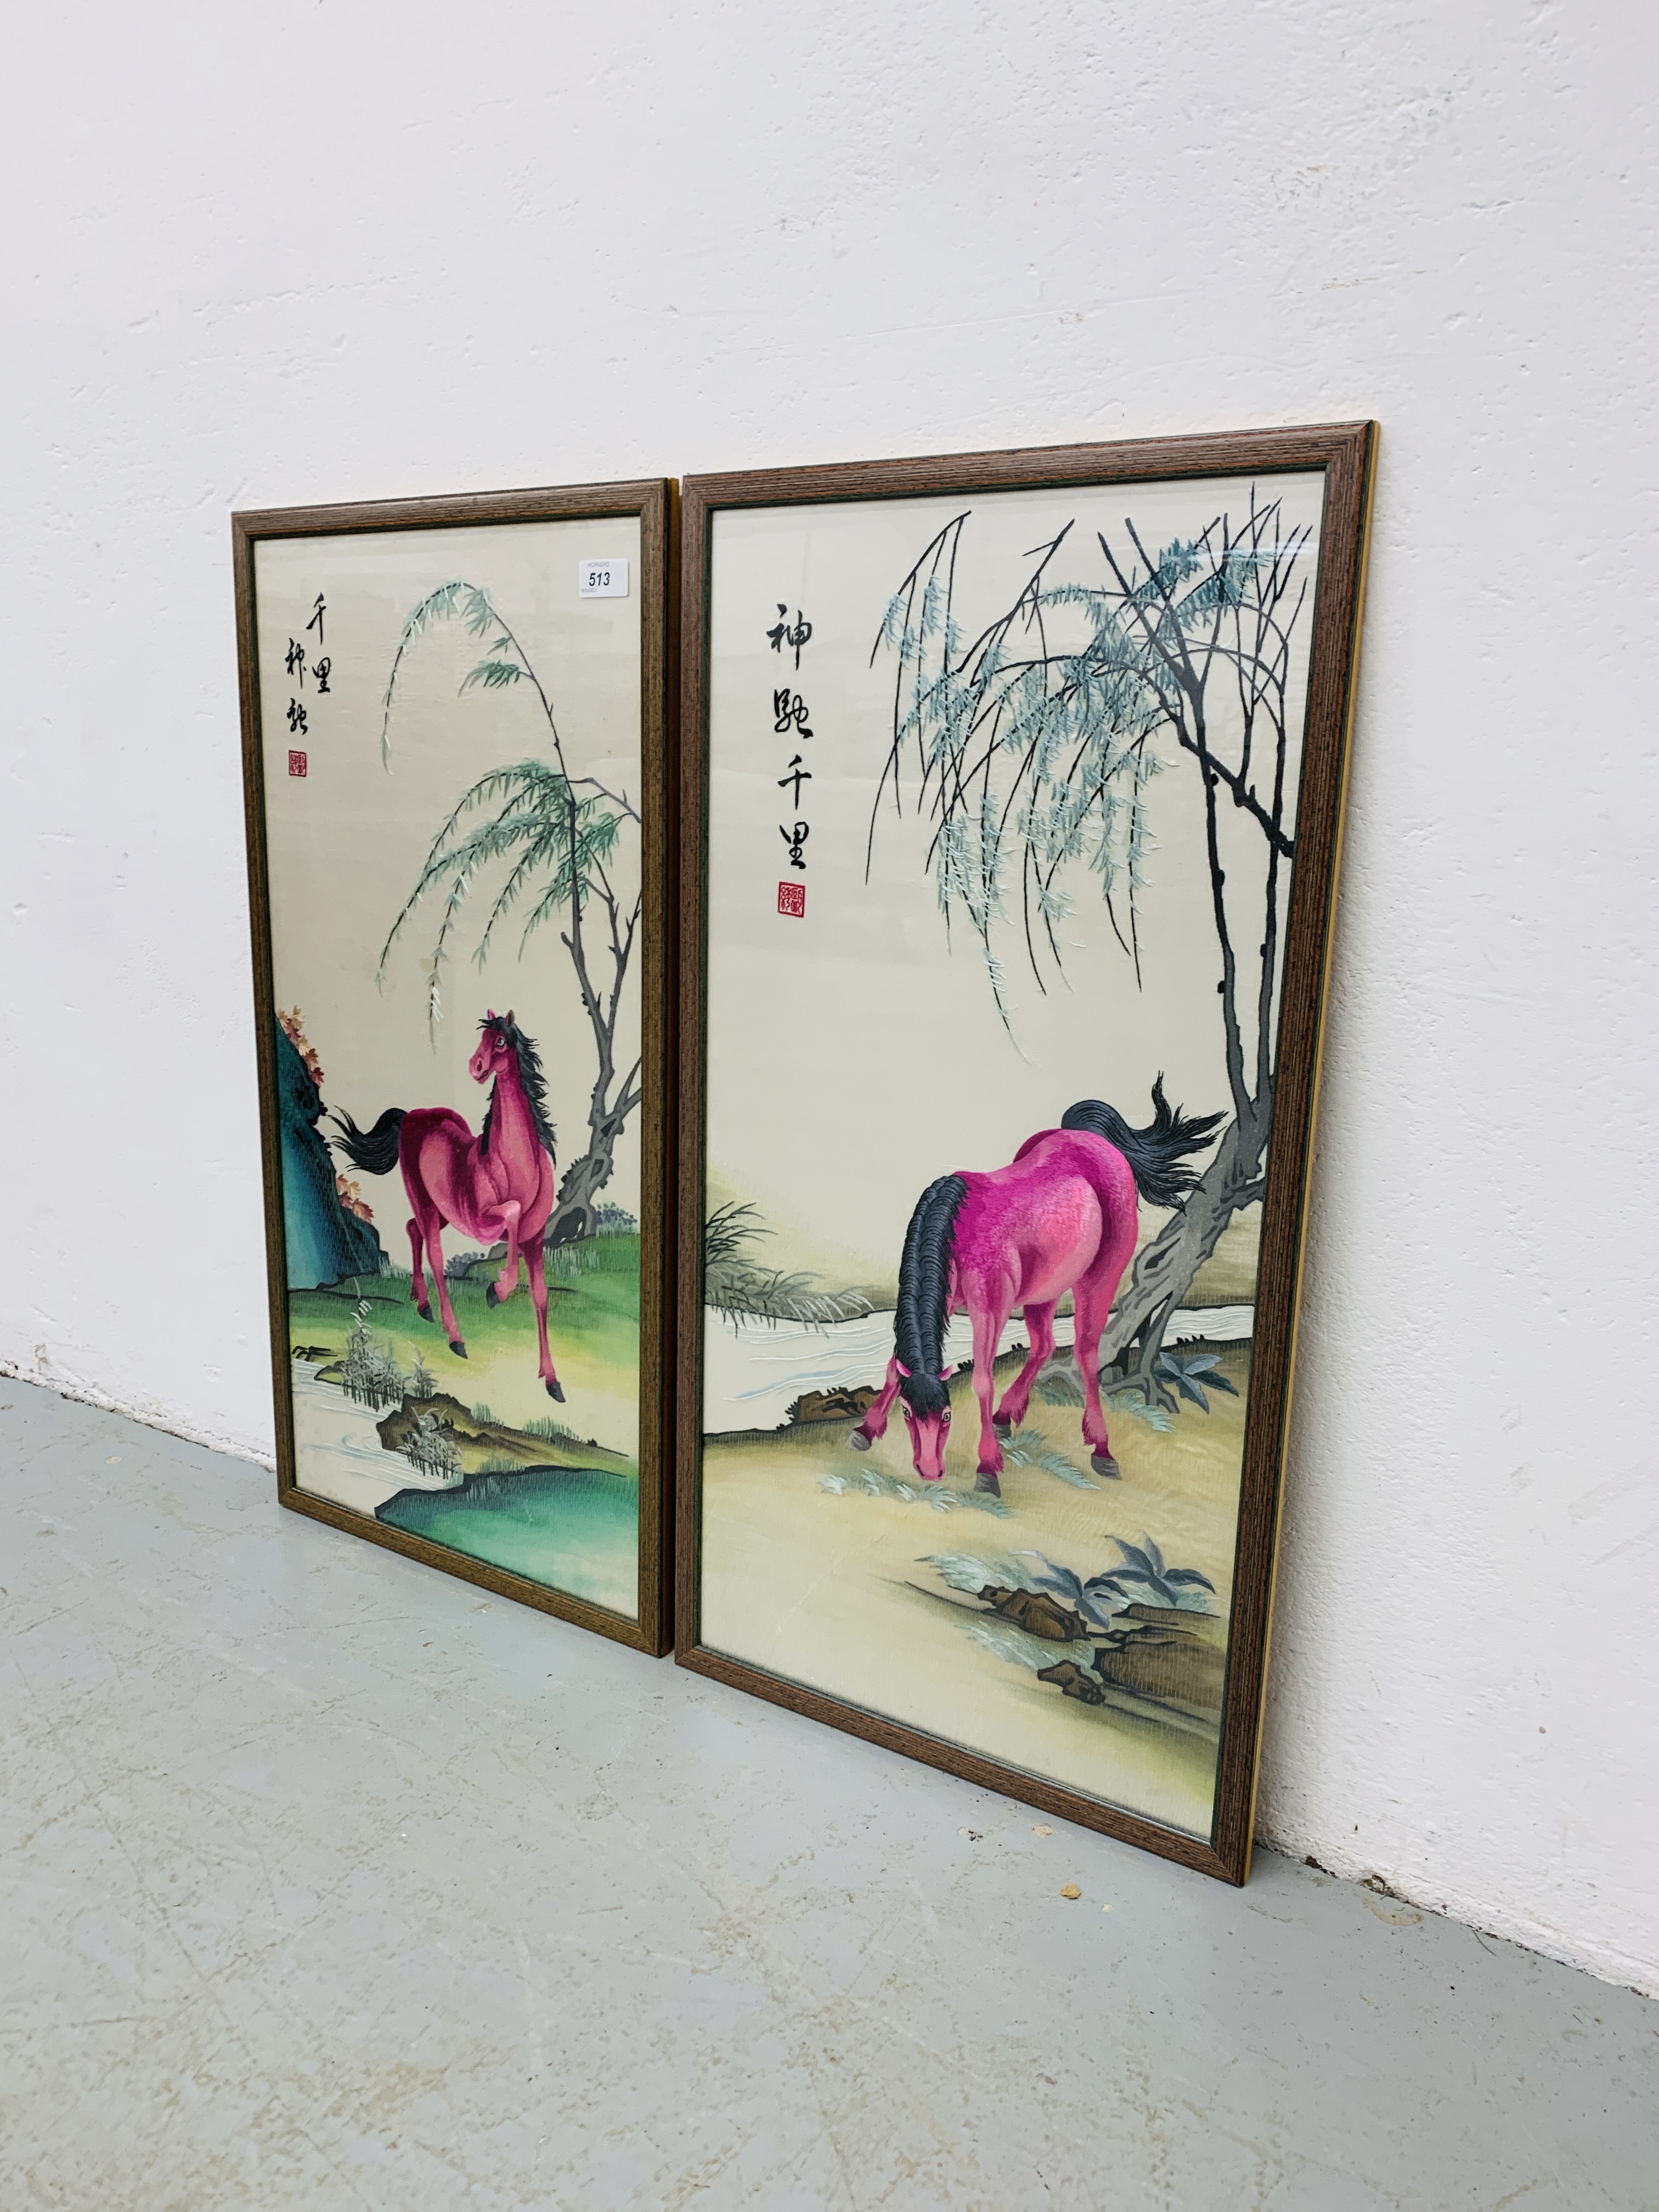 A PAIR OF FRAMED ORIENTAL EMBROIDERIES ON SILK DEPICTING PINK HORSES EACH - W 39CM. H 75CM. - Image 2 of 8